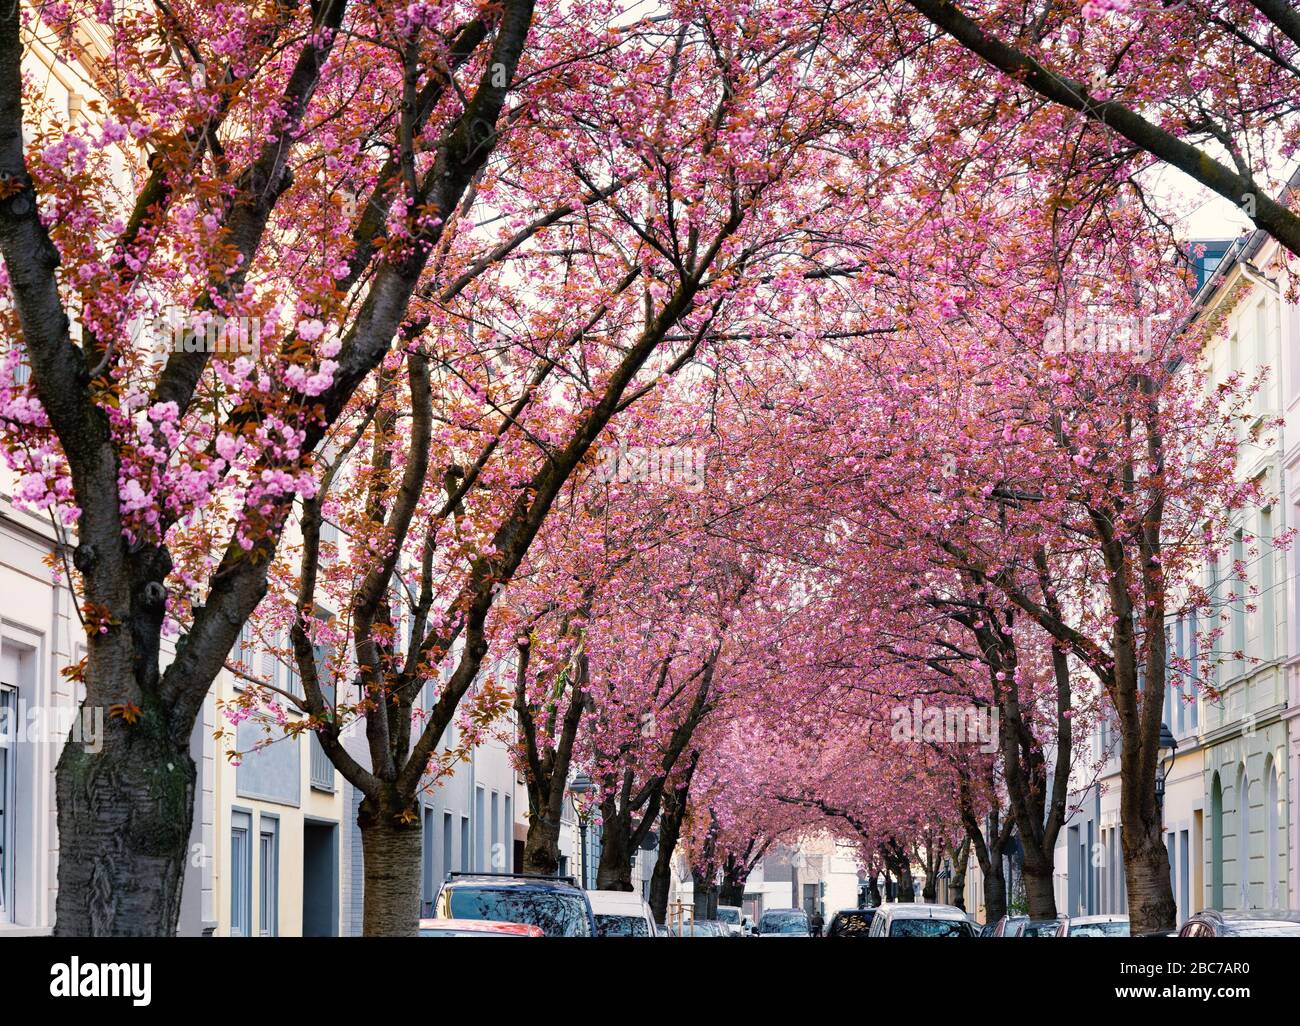 Pink cherry blossom in a street with old houses in the city of Bonn. Stock Photo